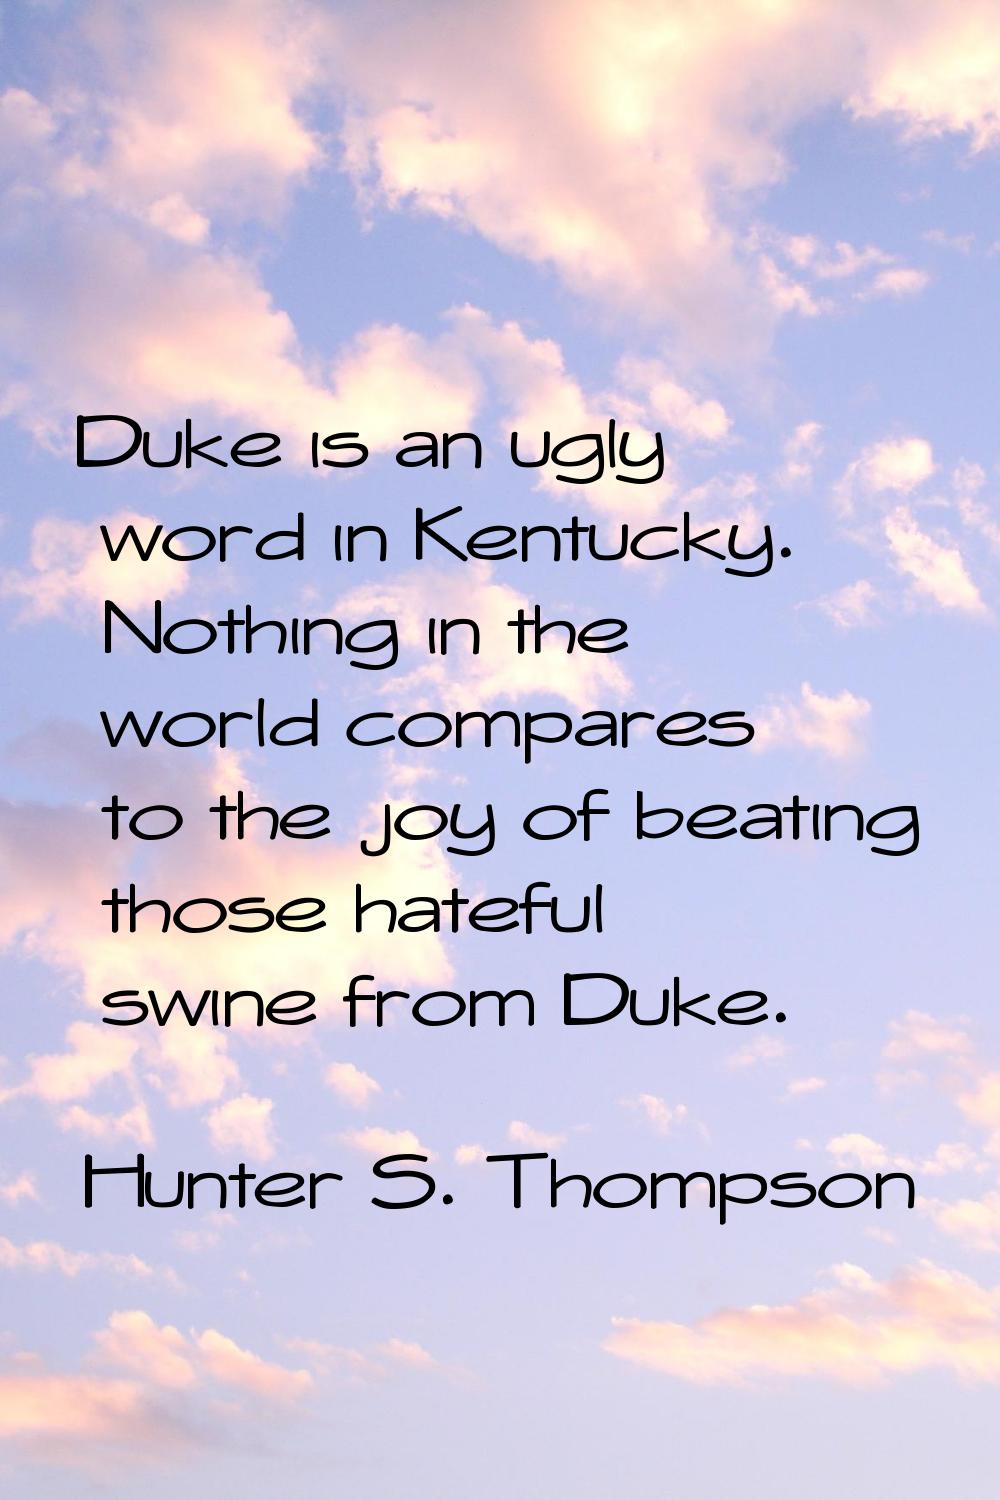 Duke is an ugly word in Kentucky. Nothing in the world compares to the joy of beating those hateful